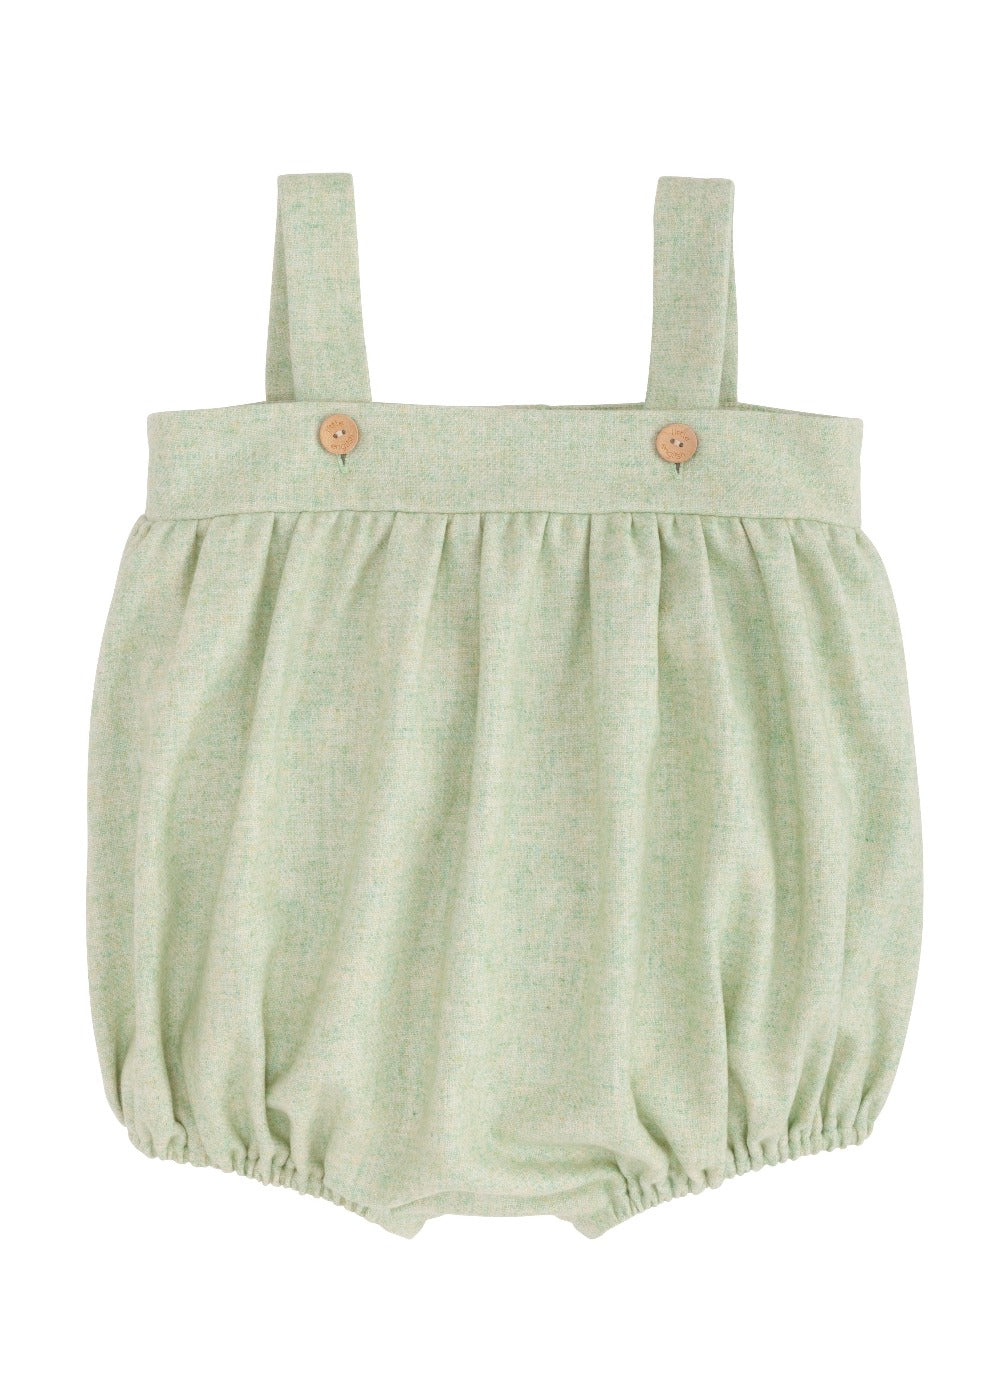 seguridadindustrialcr traditional saratoga bubble for baby, green wool bubble for fall